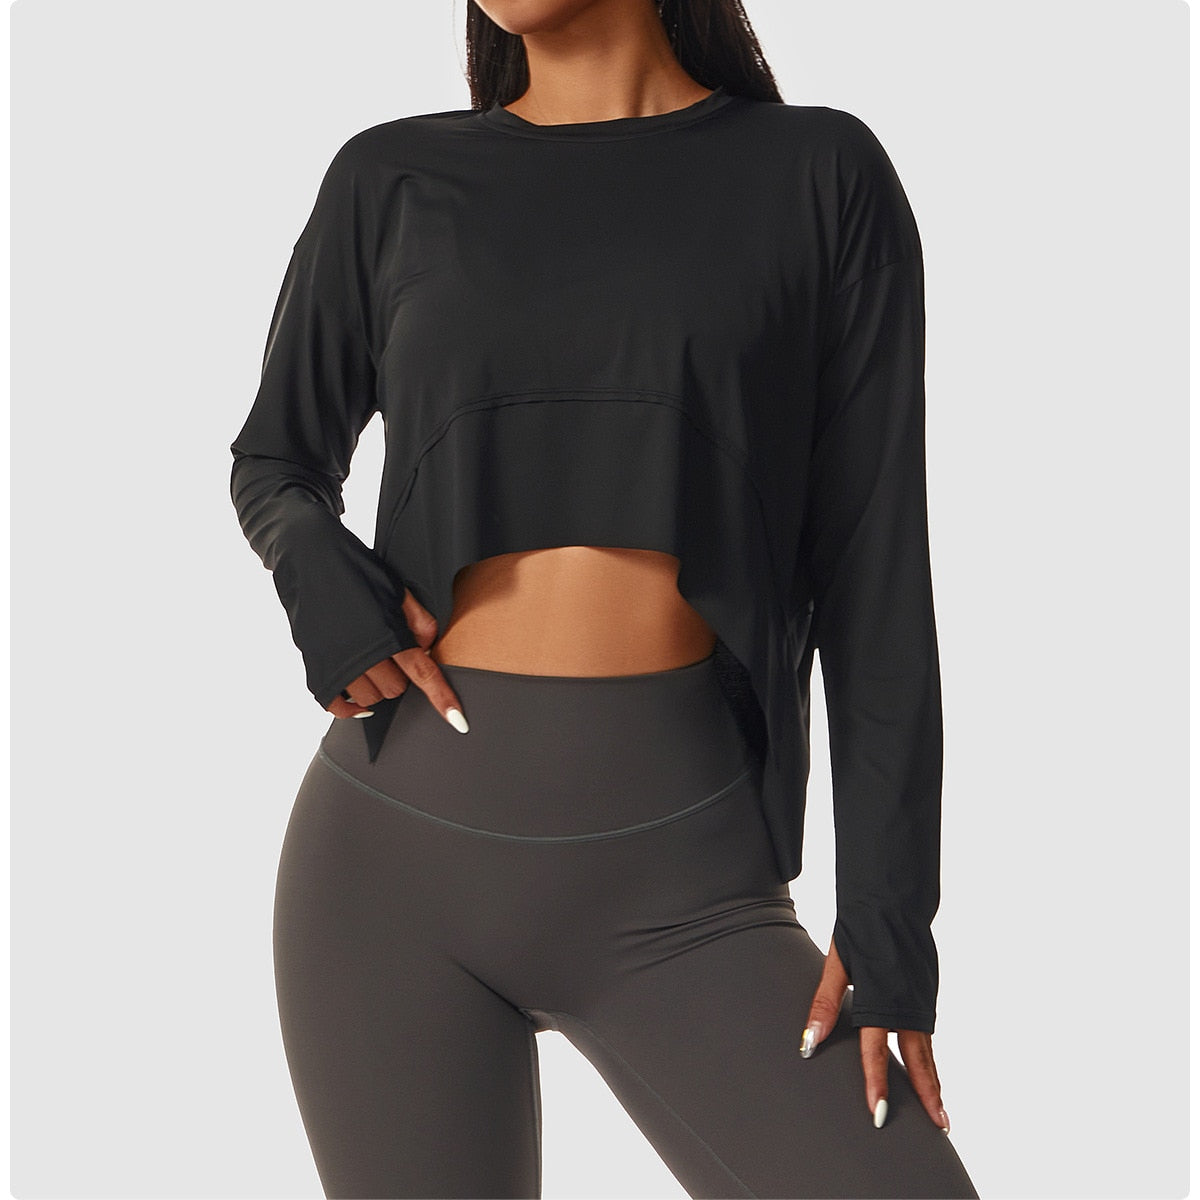 Women's Sport Tops Workout Crop Sweatshirt Long Sleeve High Elastic Sports Cycling Running Training Loose Fitness Sport Blouse The Clothing Company Sydney